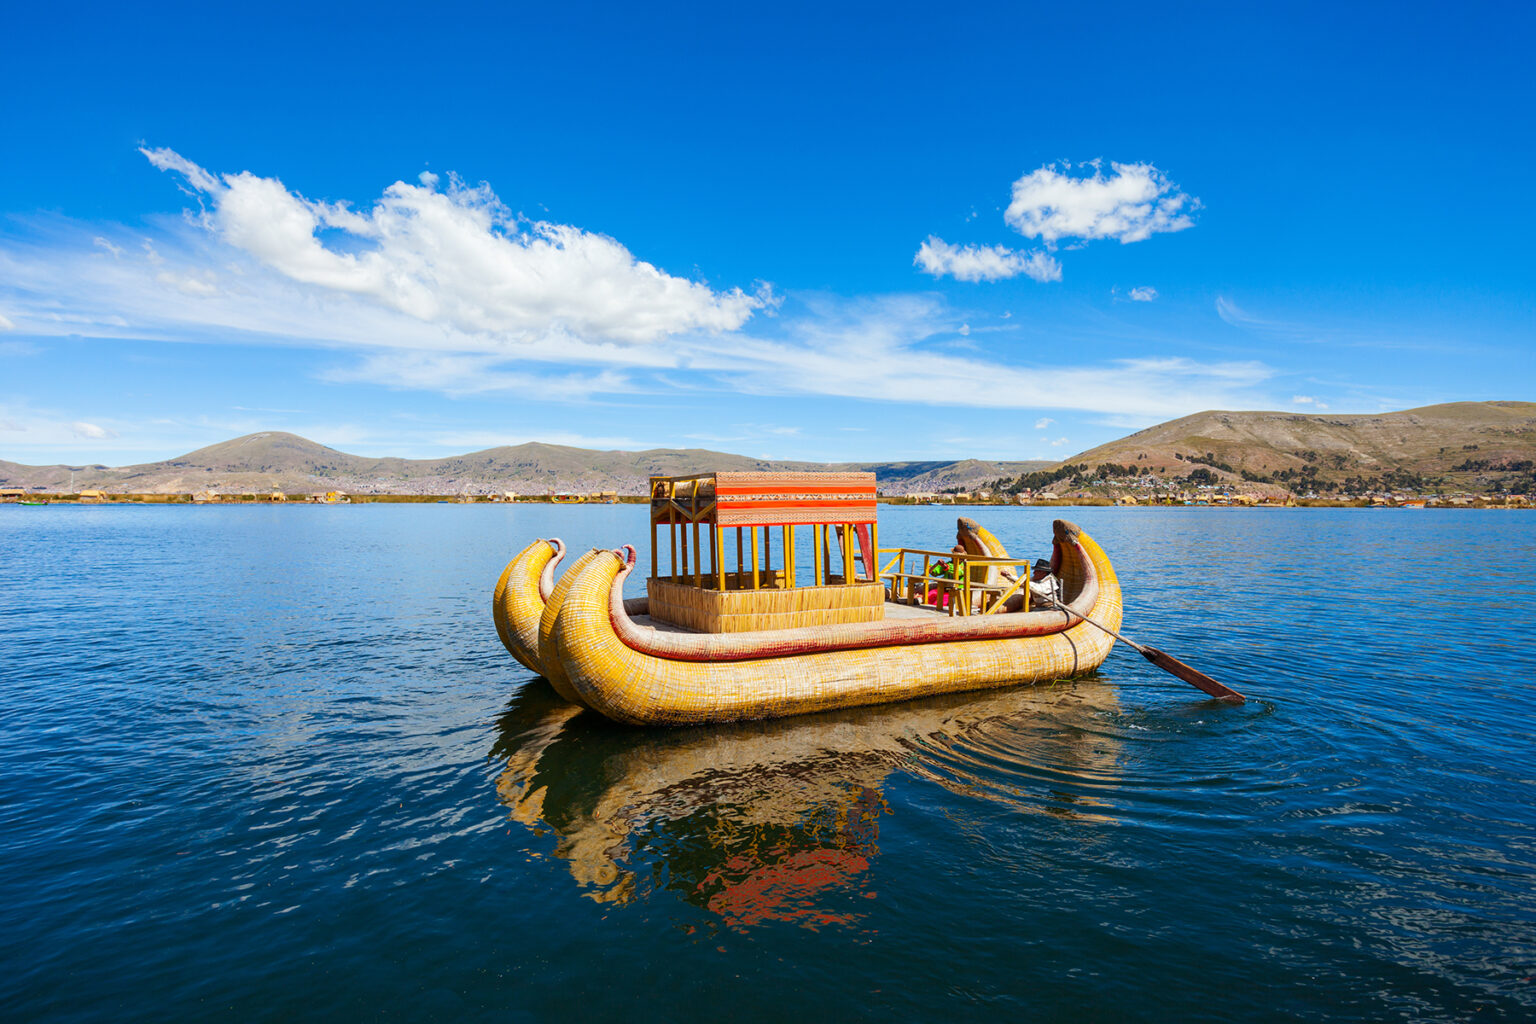 Traditional boat on a lake with blue sky